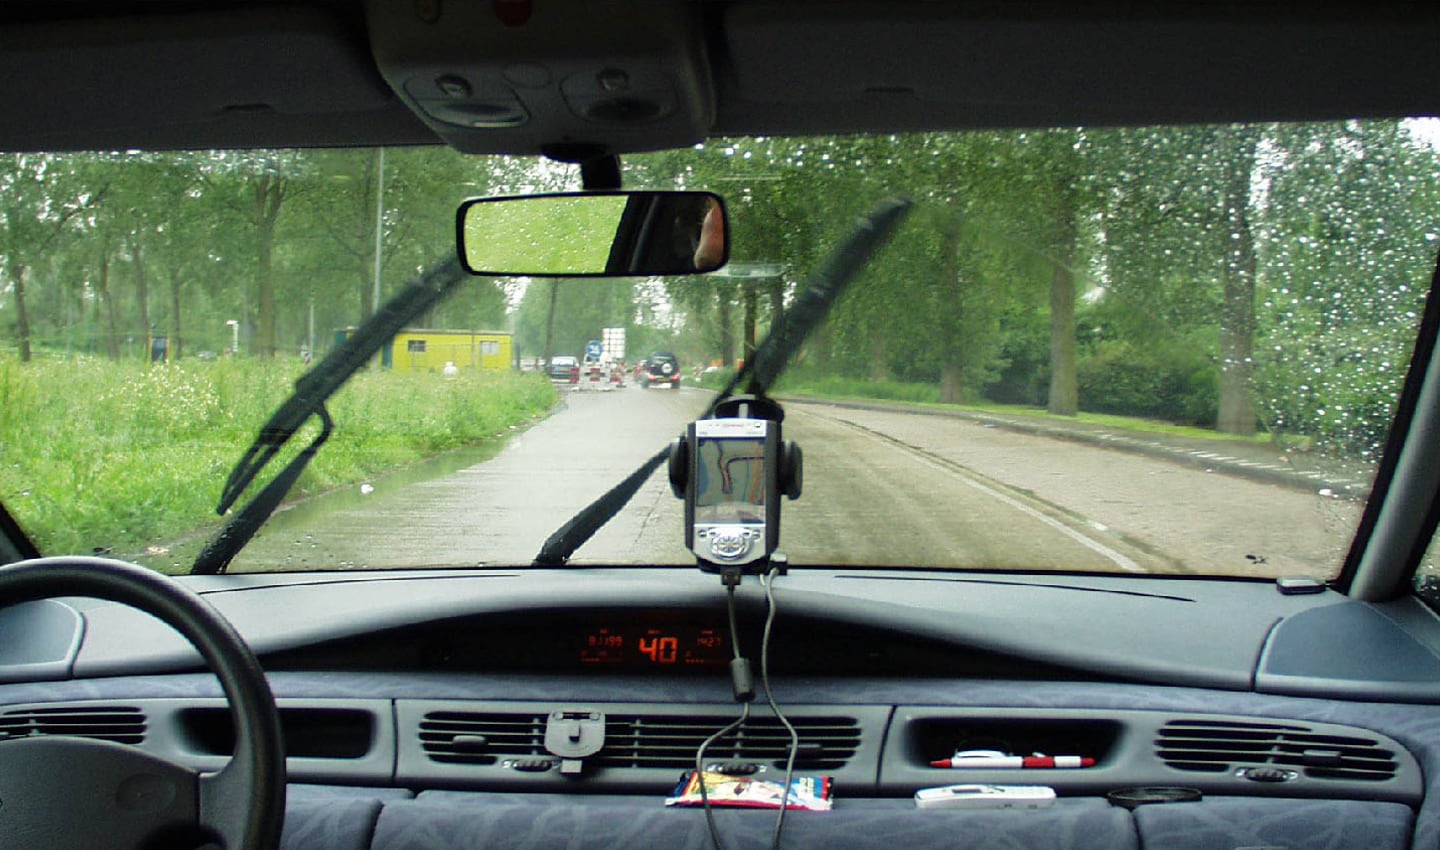 A prototype of one of TomTom’s first PDA-based navigation applications.